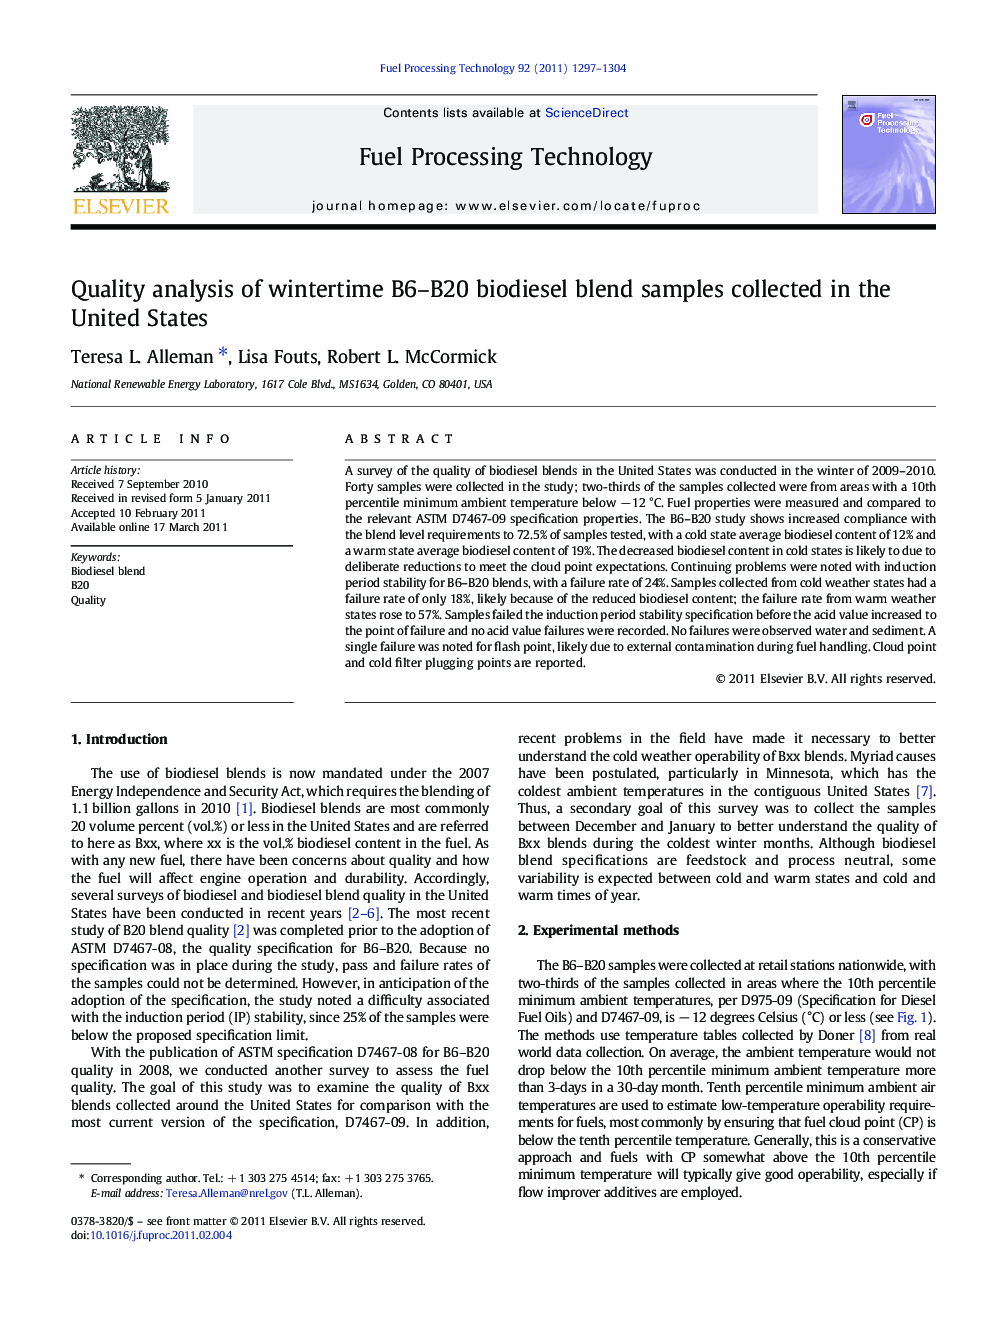 Quality analysis of wintertime B6–B20 biodiesel blend samples collected in the United States